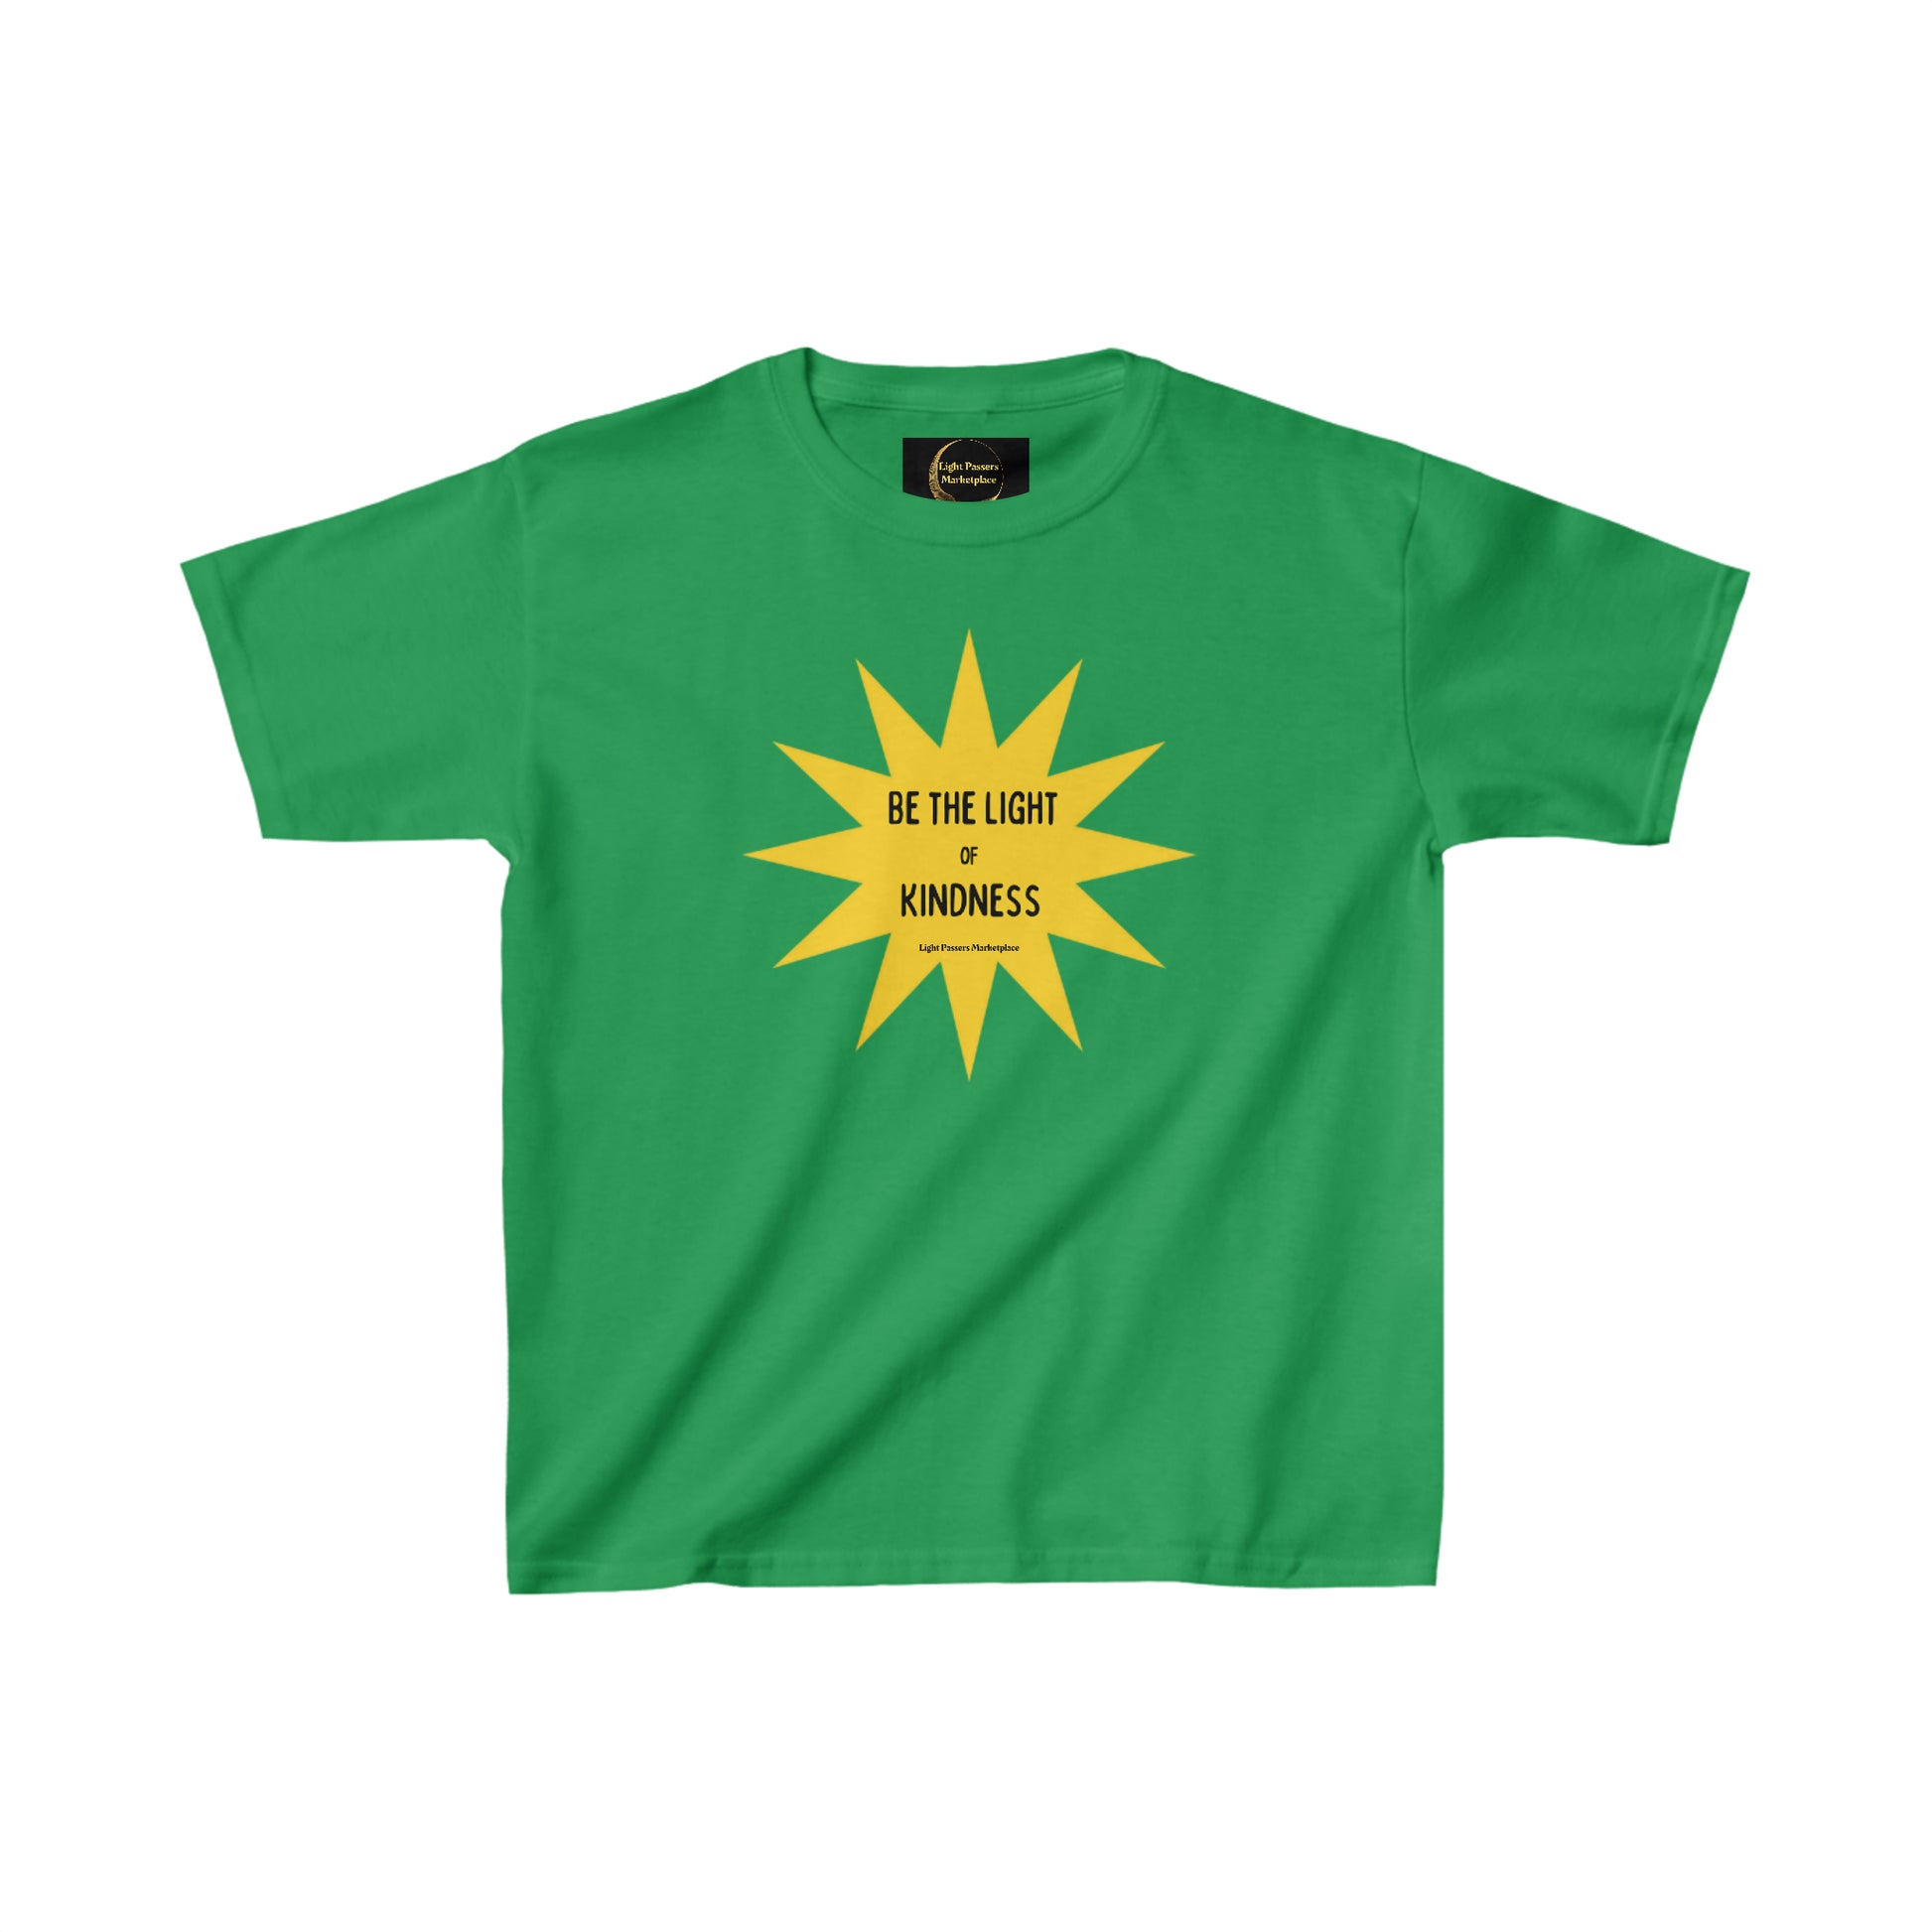 Youth cotton t-shirt featuring a yellow star design. Made of 100% cotton fabric, with twill tape shoulders for durability and ribbed collar for curl resistance. Ideal for everyday wear.